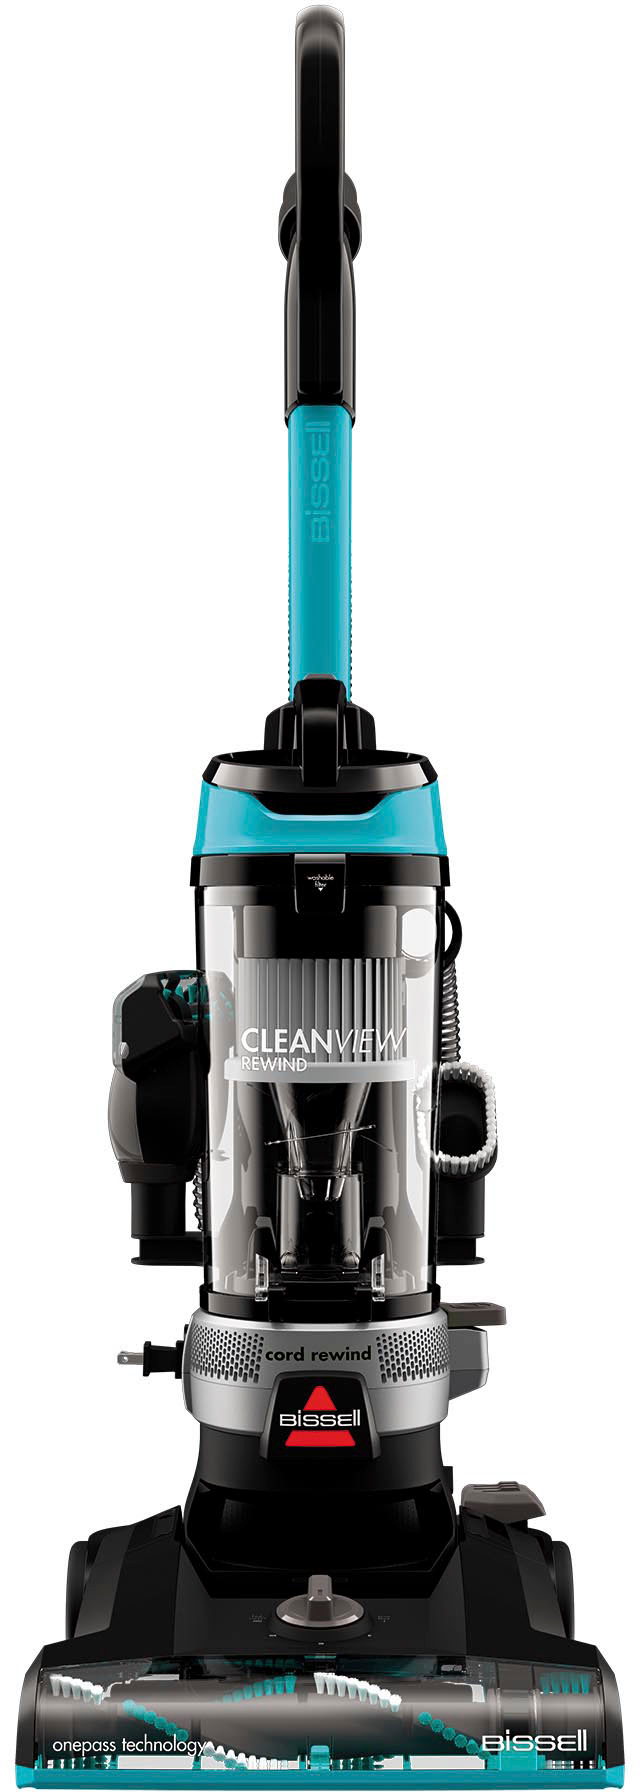 Bissell CleanView Rewind Upright Vacuum Cleaner